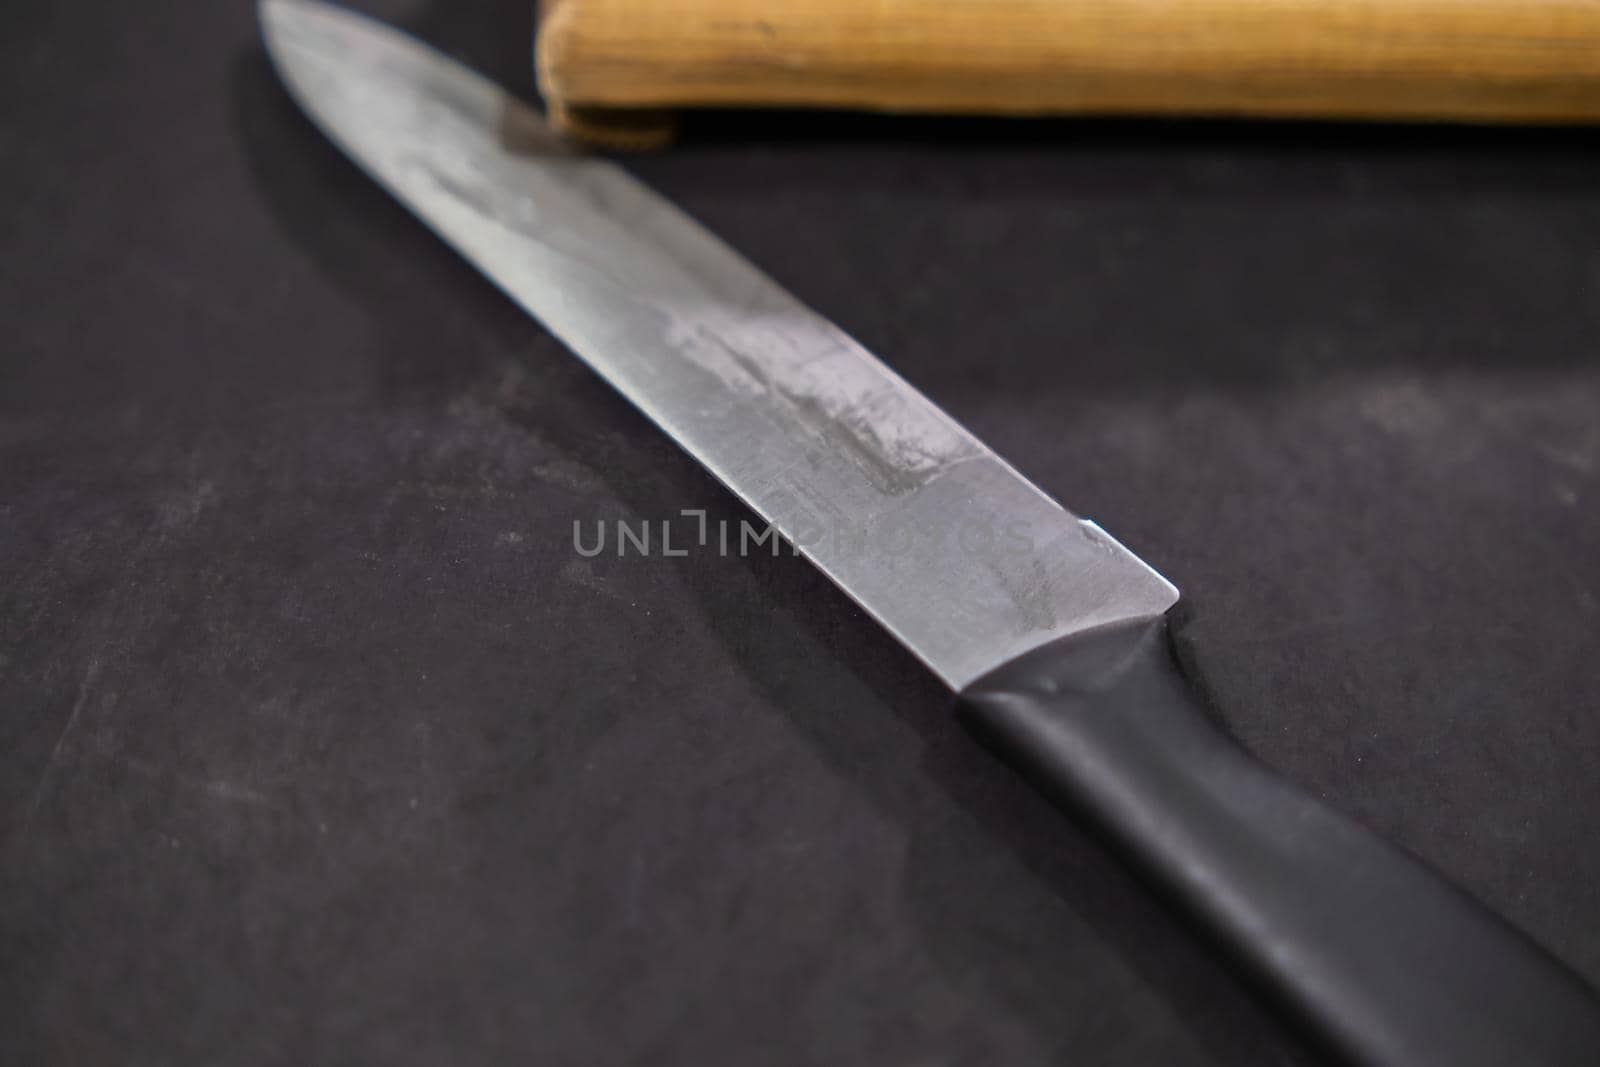 Long knife with black handle on dark surface by Kanelbulle